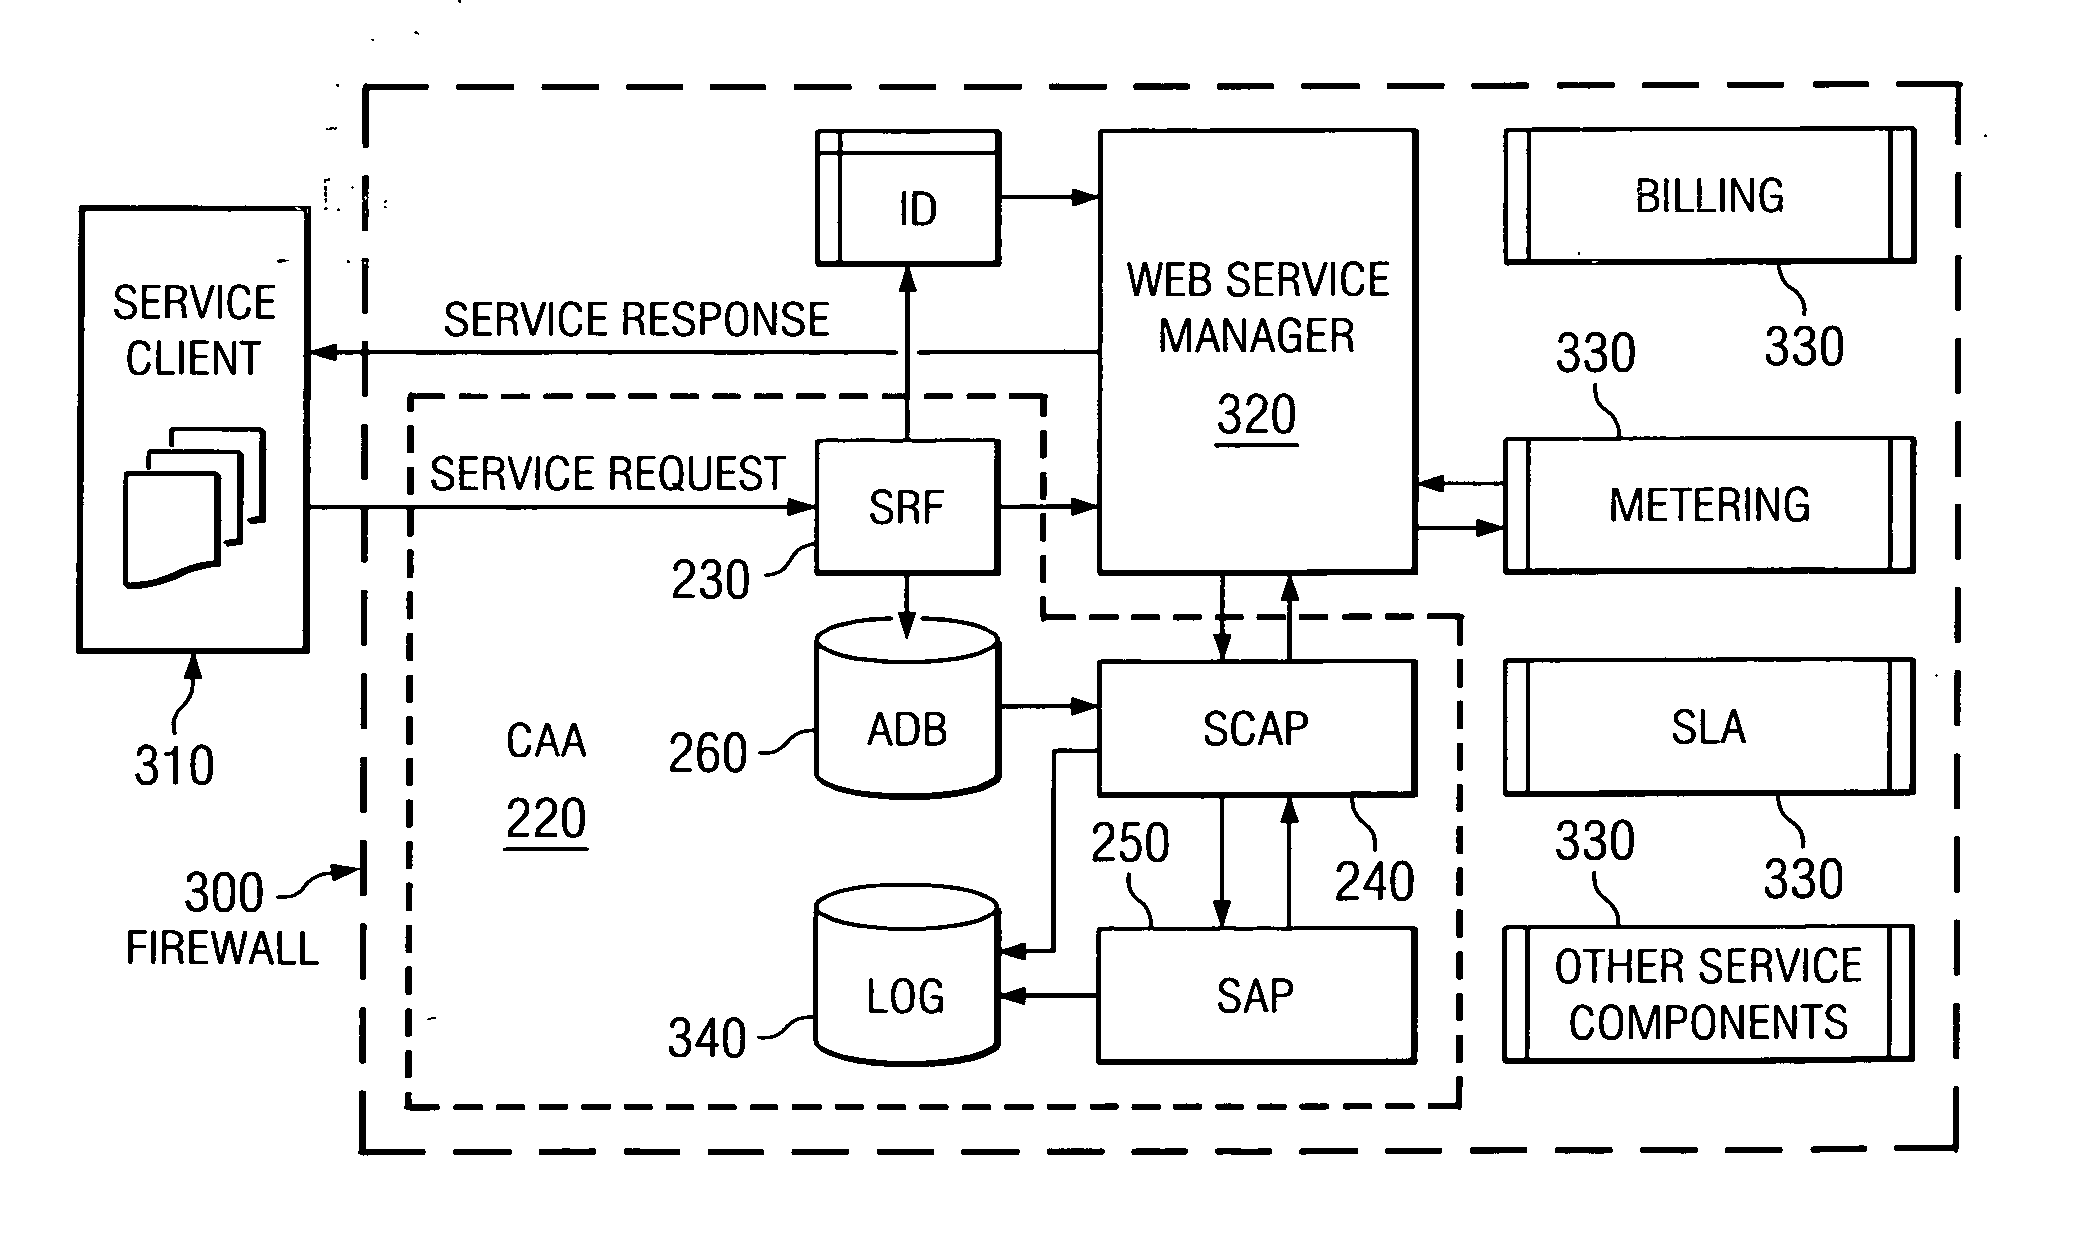 Architecture and design for central authentication and authorization in an on-demand utility environment